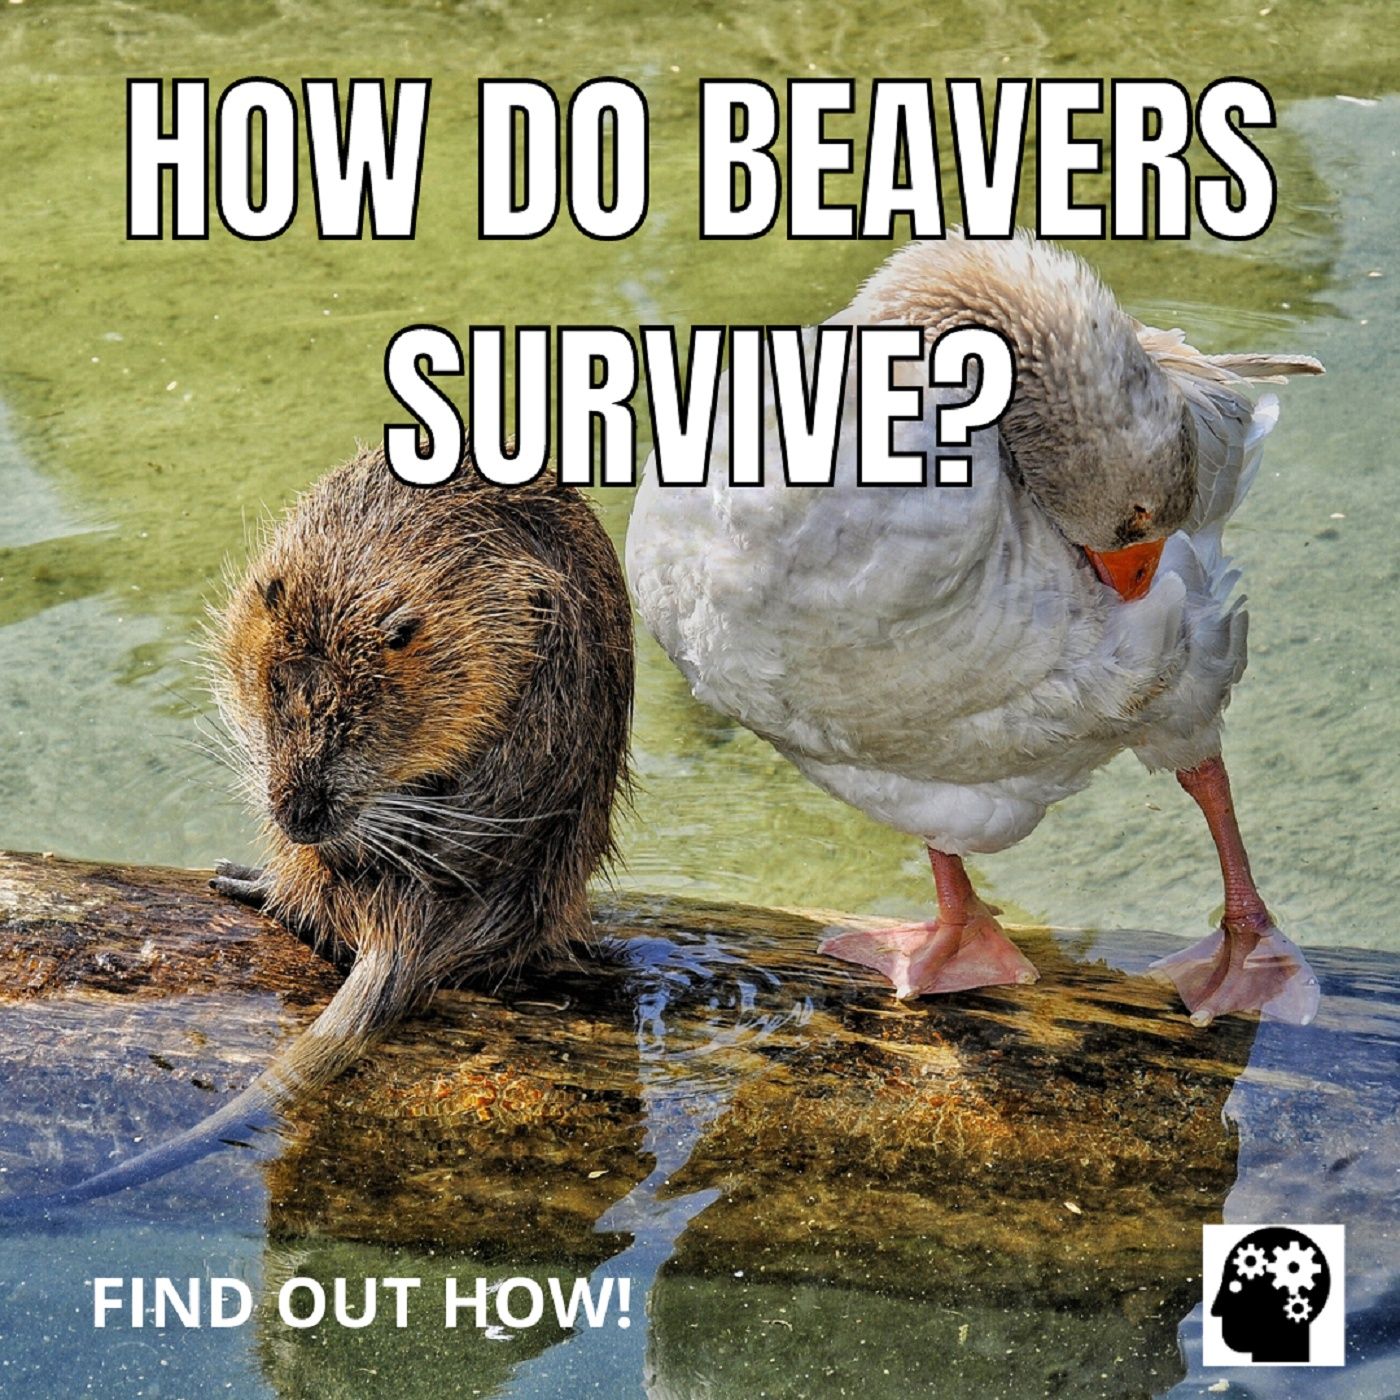 How Do Beavers Survive?